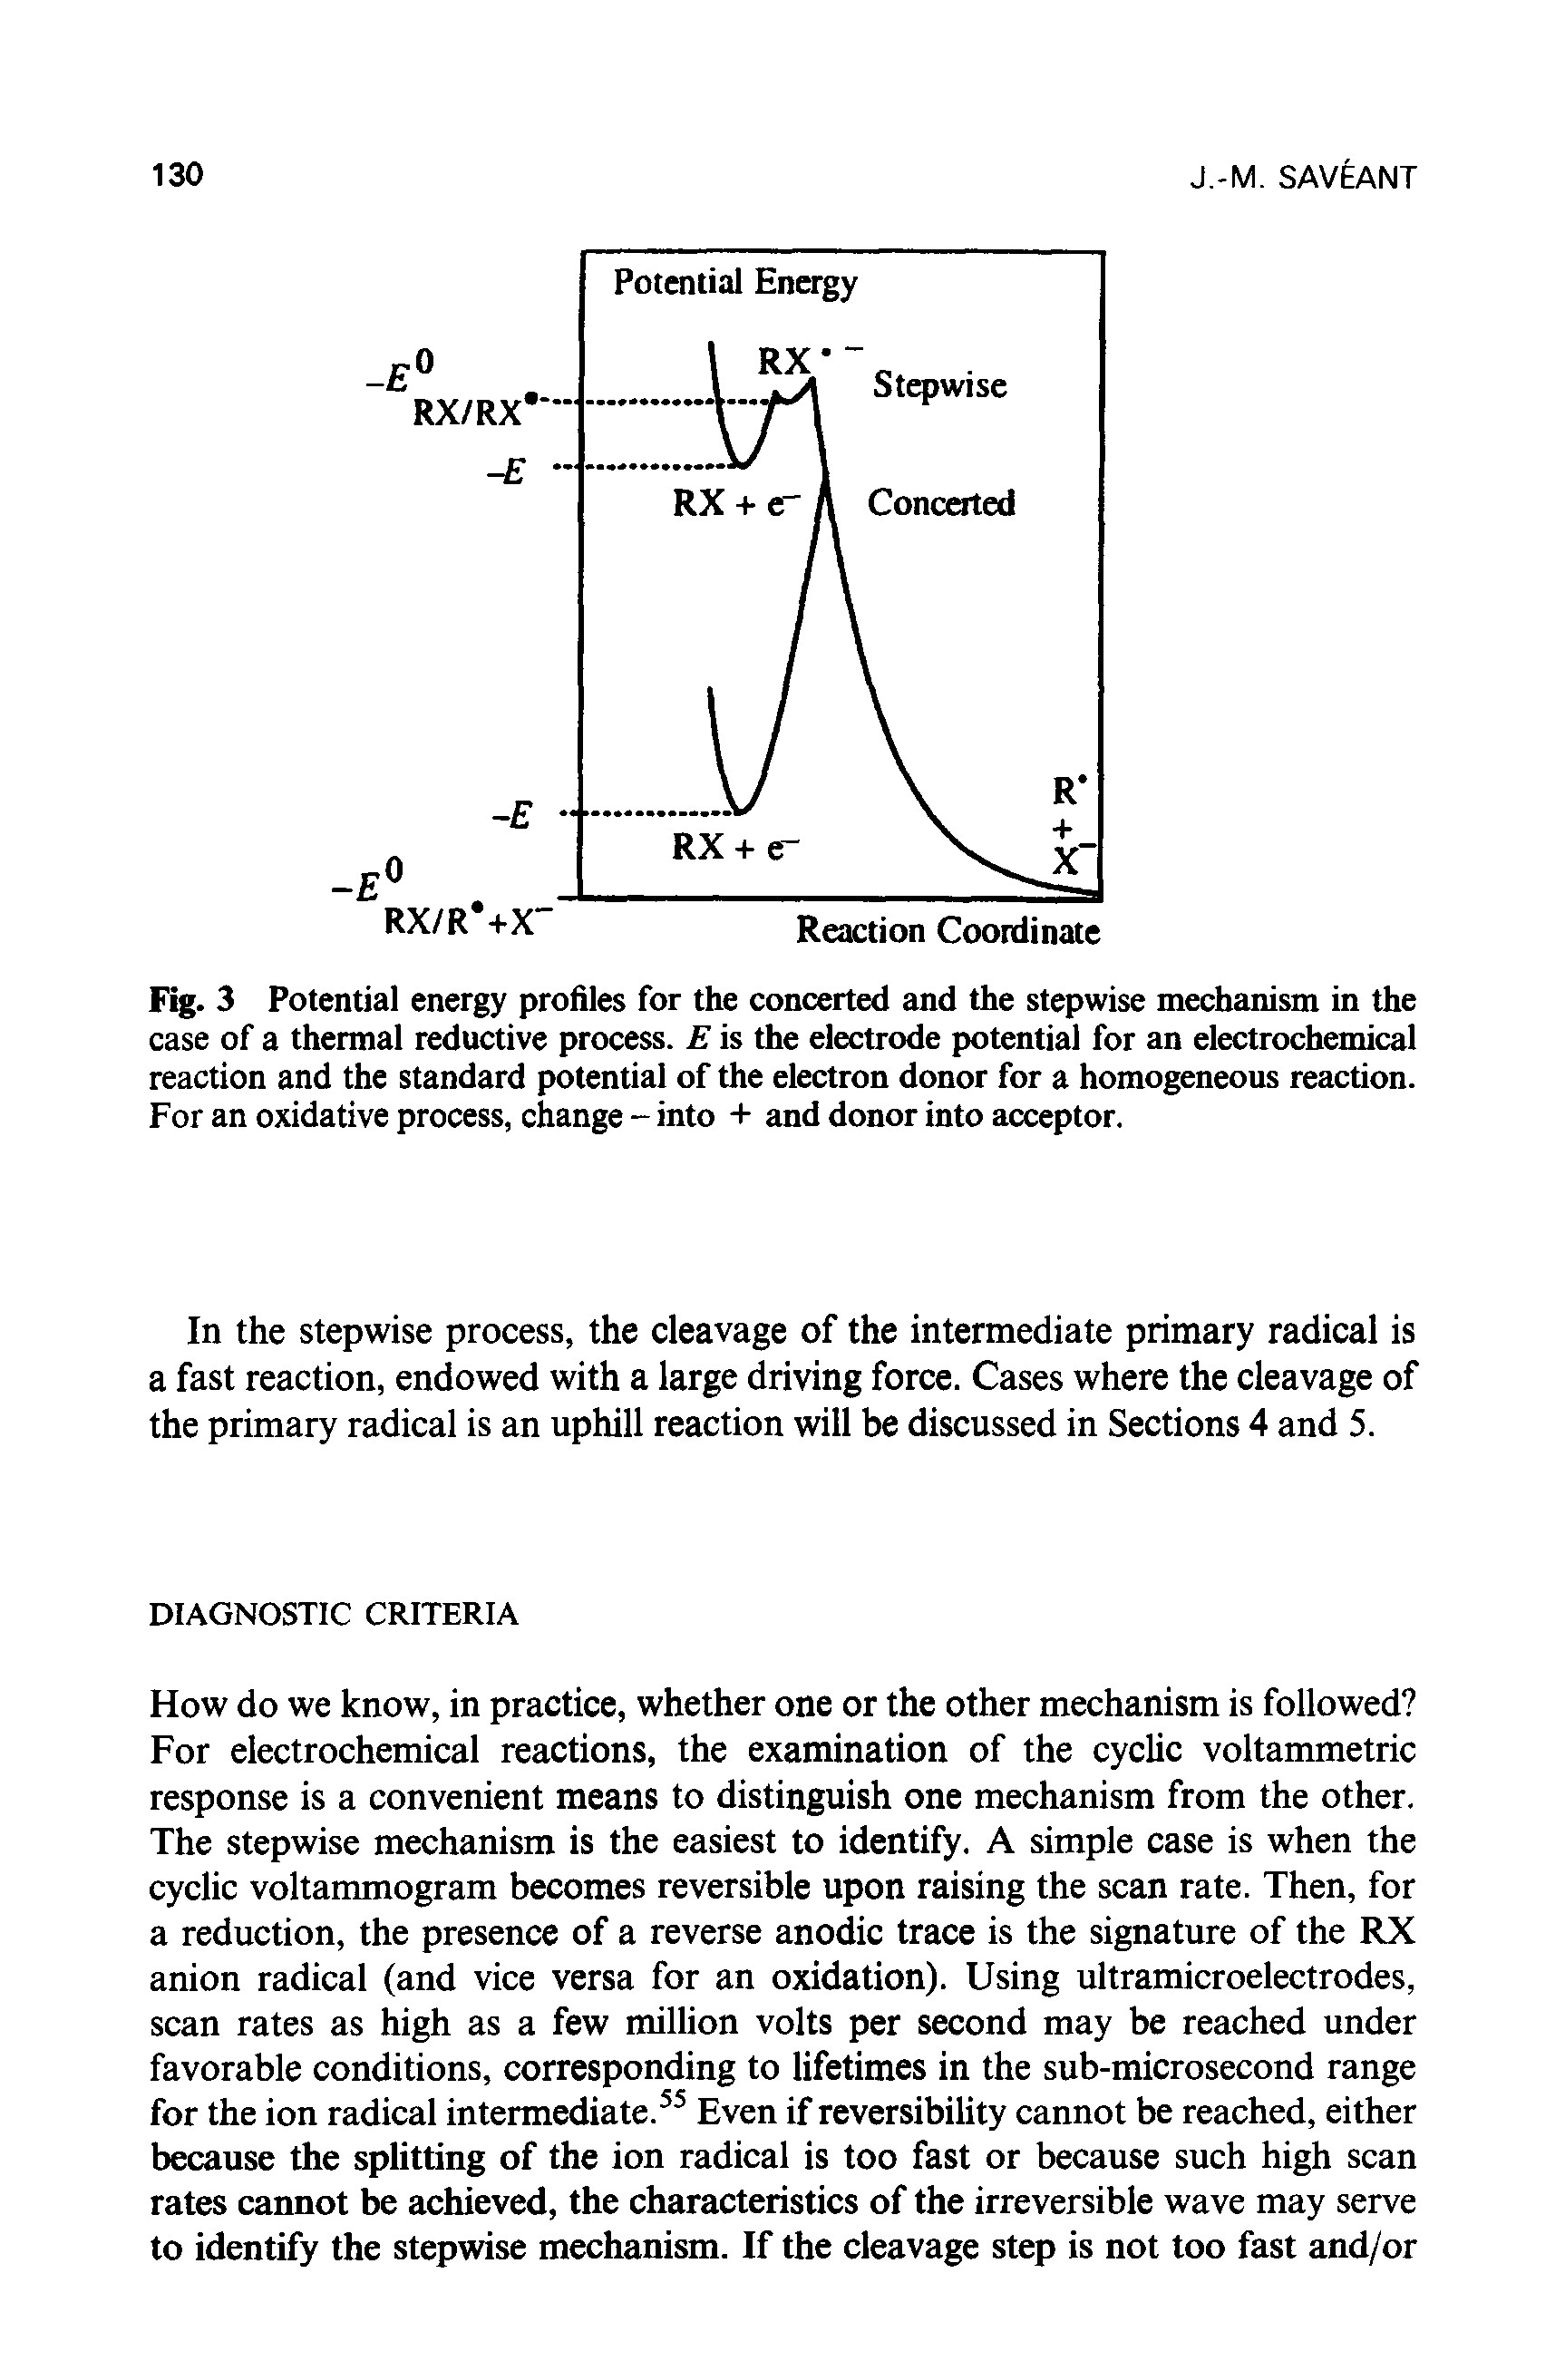 Fig. 3 Potential energy profiles for the concerted and the stepwise mechanism in the case of a thermal reductive process. E is the electrode potential for an electrochemical reaction and the standard potential of the electron donor for a homogeneous reaction. For an oxidative process, change - into + and donor into acceptor.